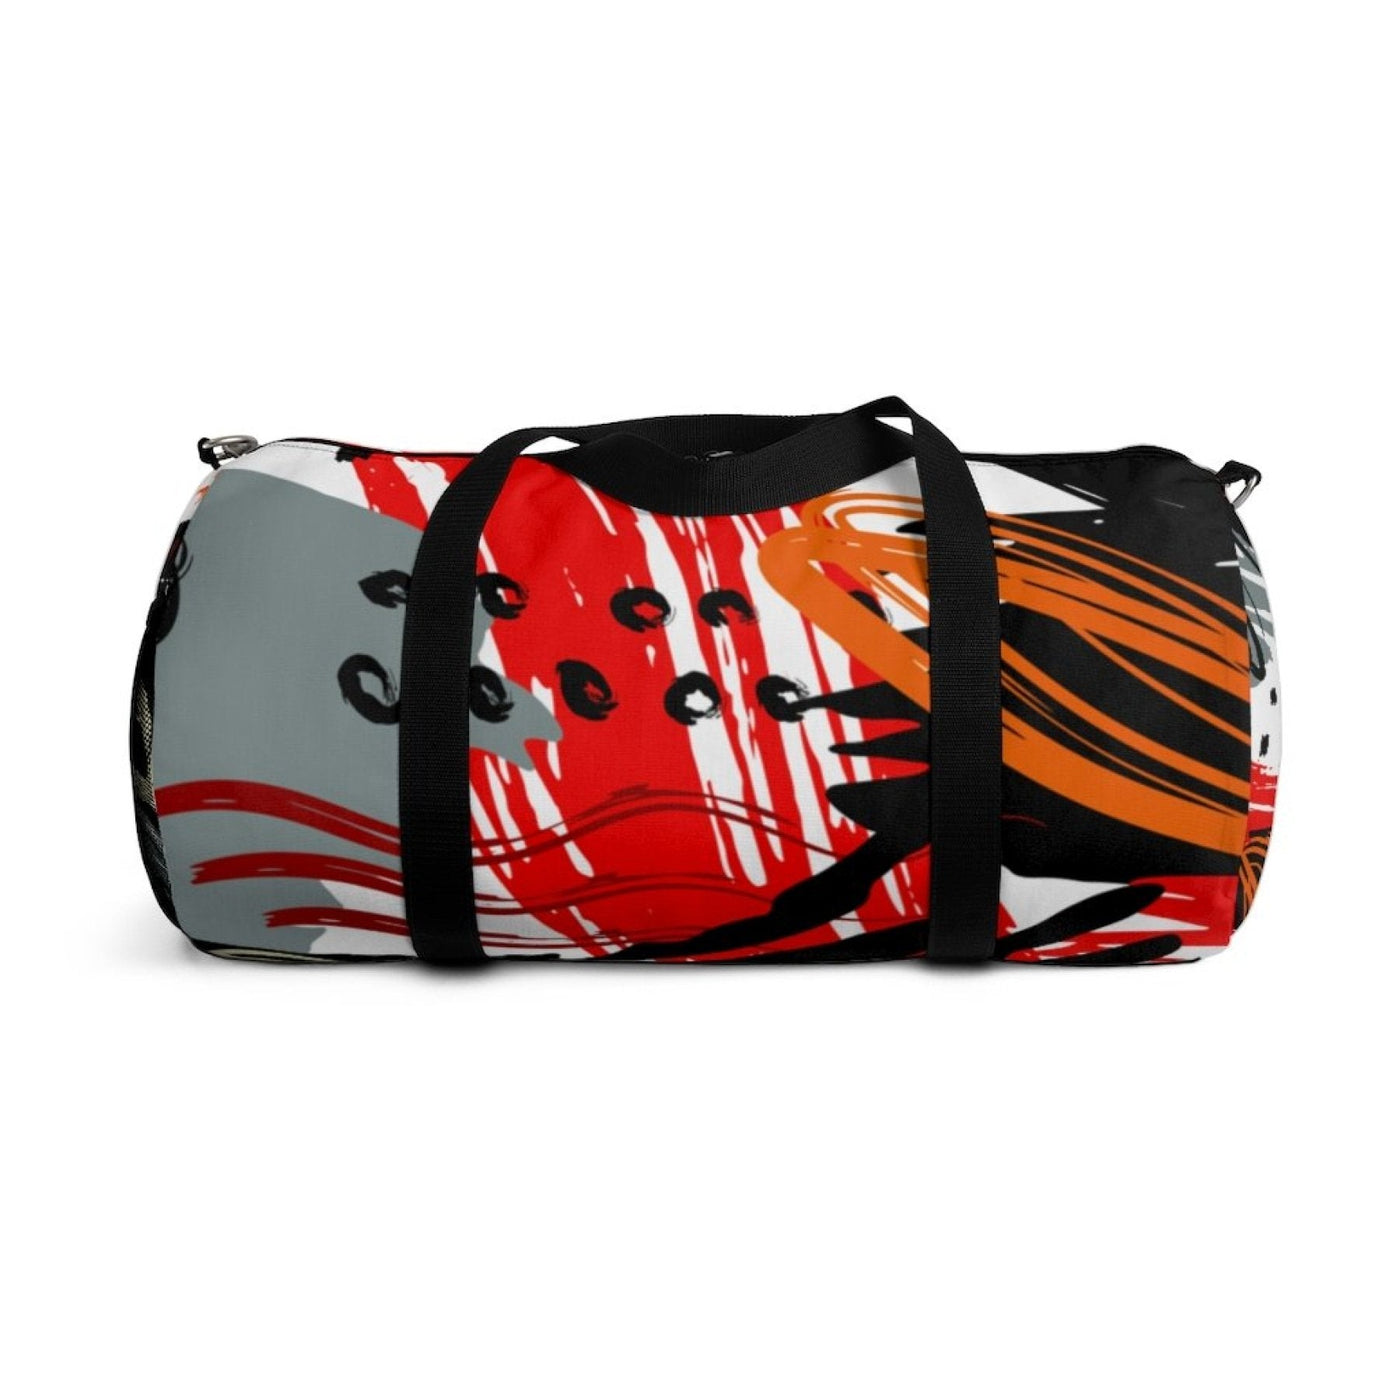 Duffel Bag Carry On Luggage Multicolor - Bags | Duffel Bags